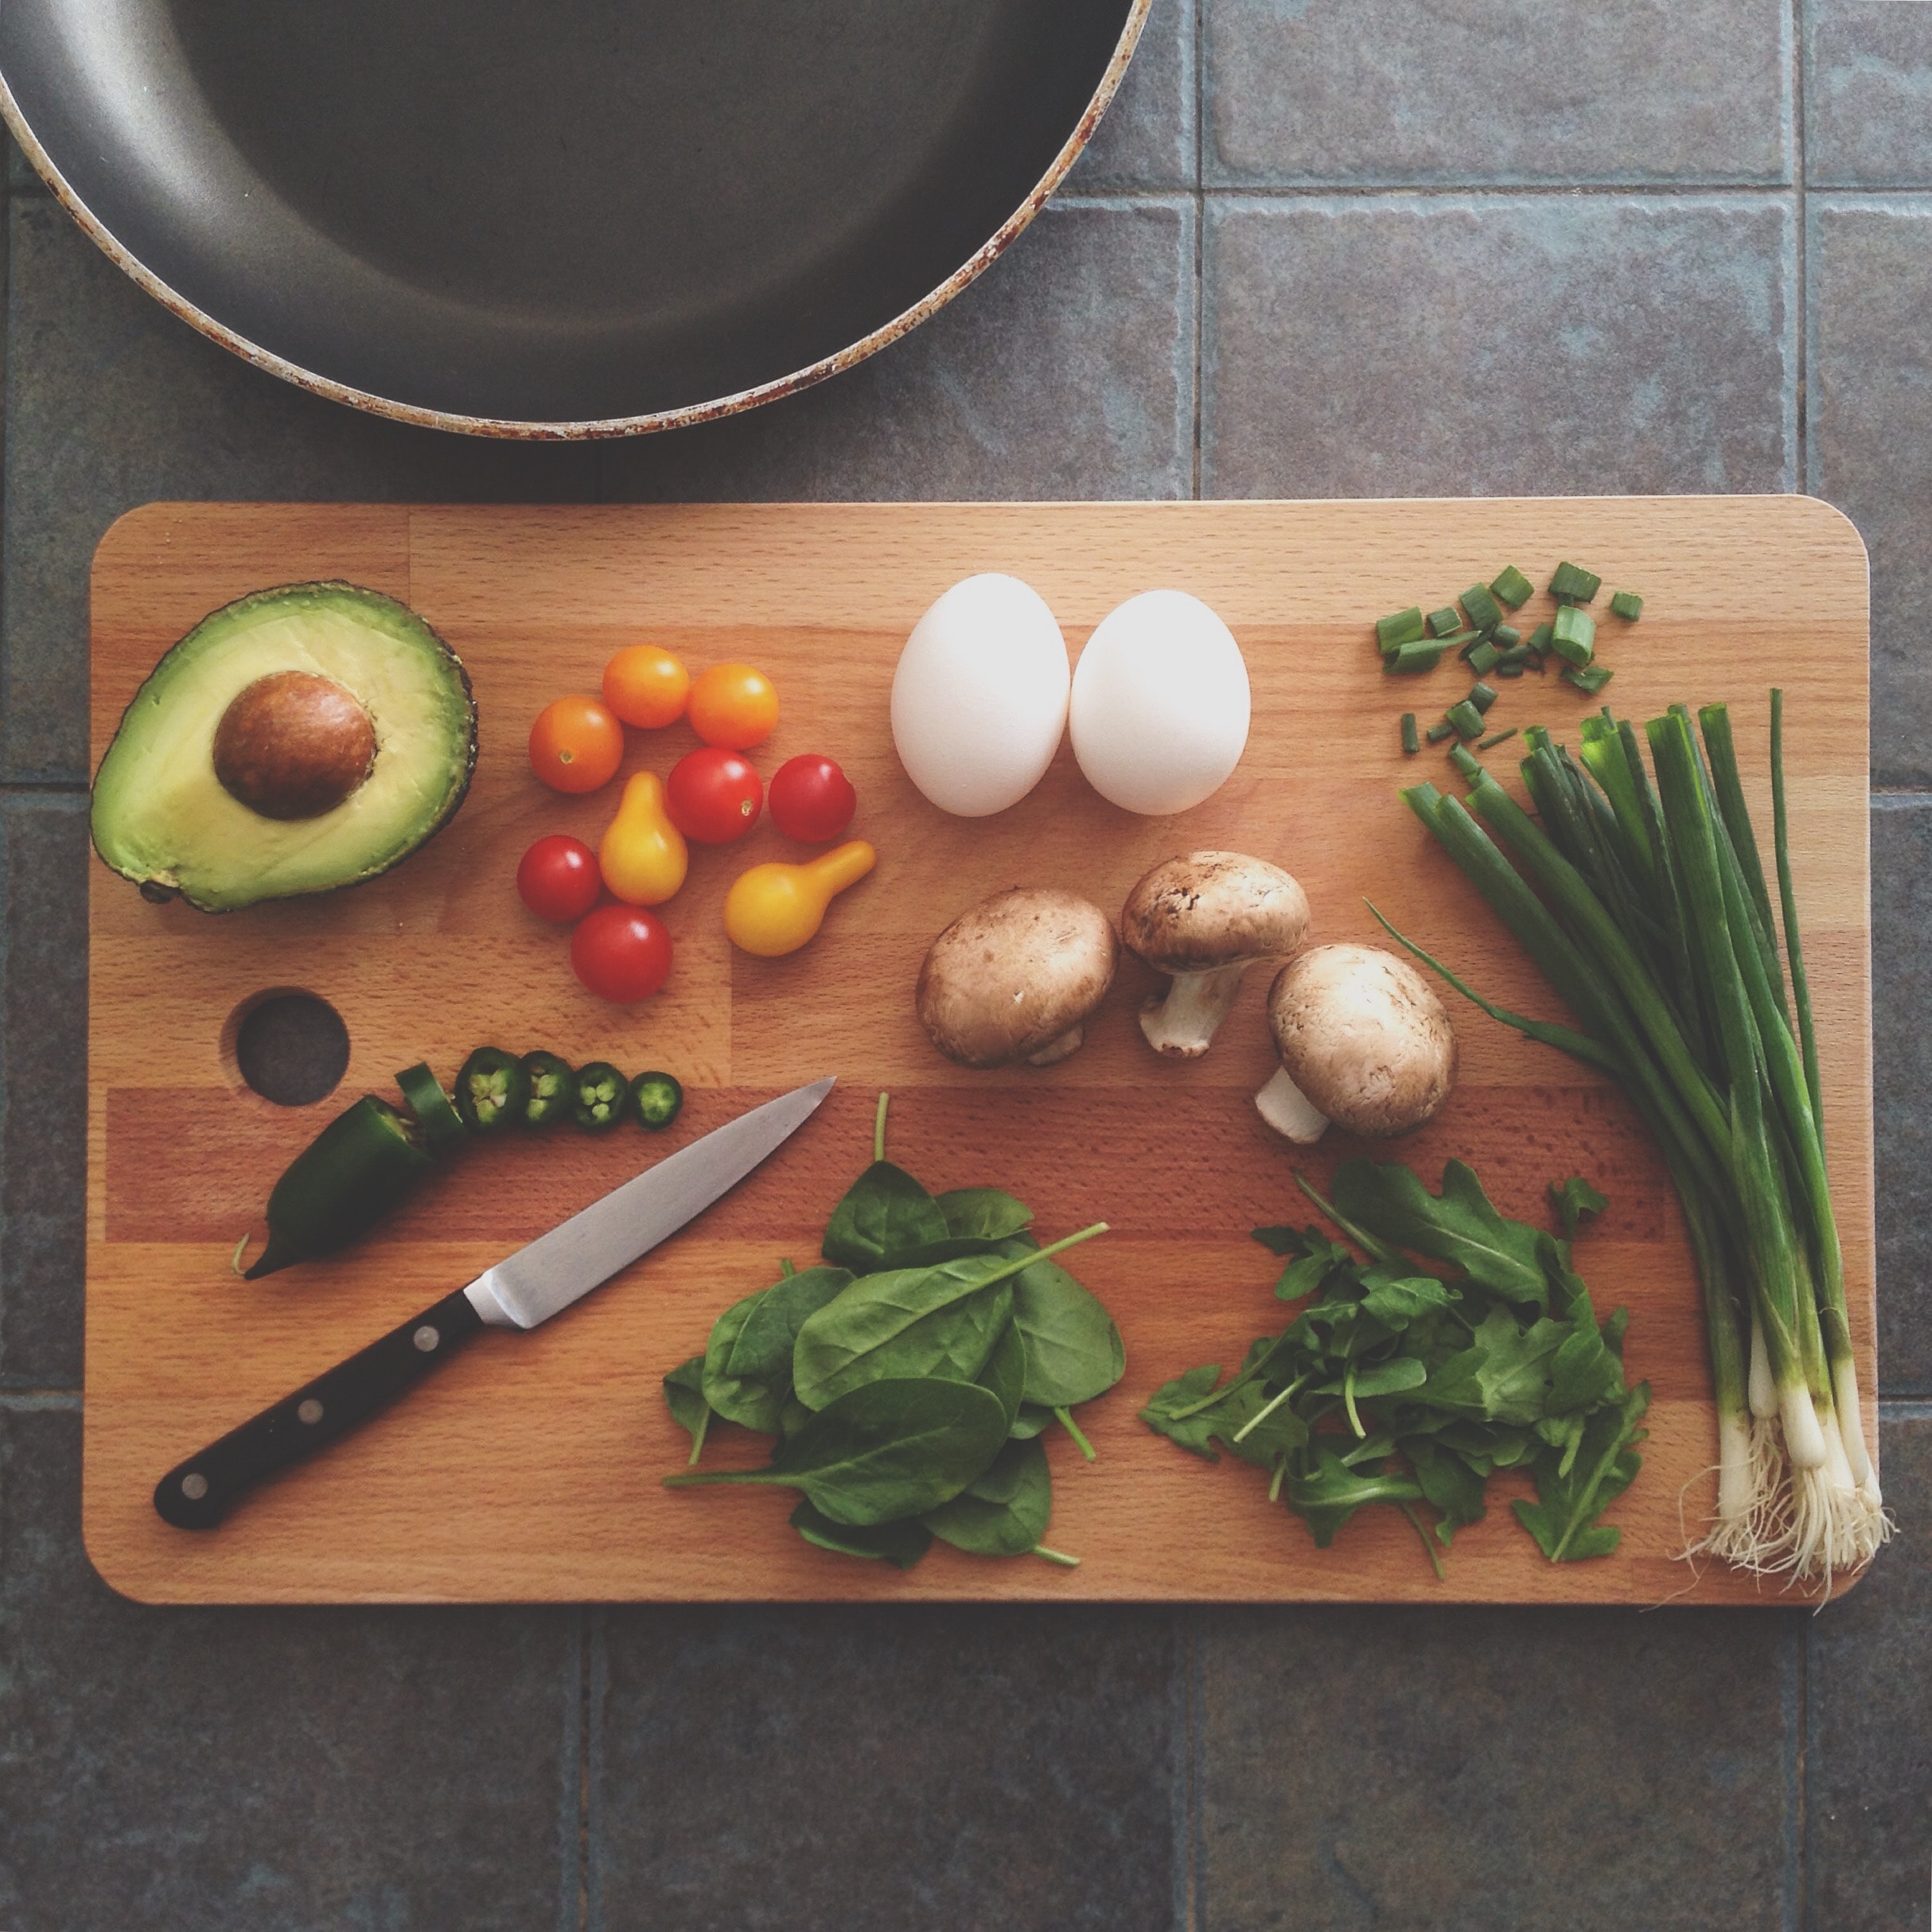 ingredients on a cutting board